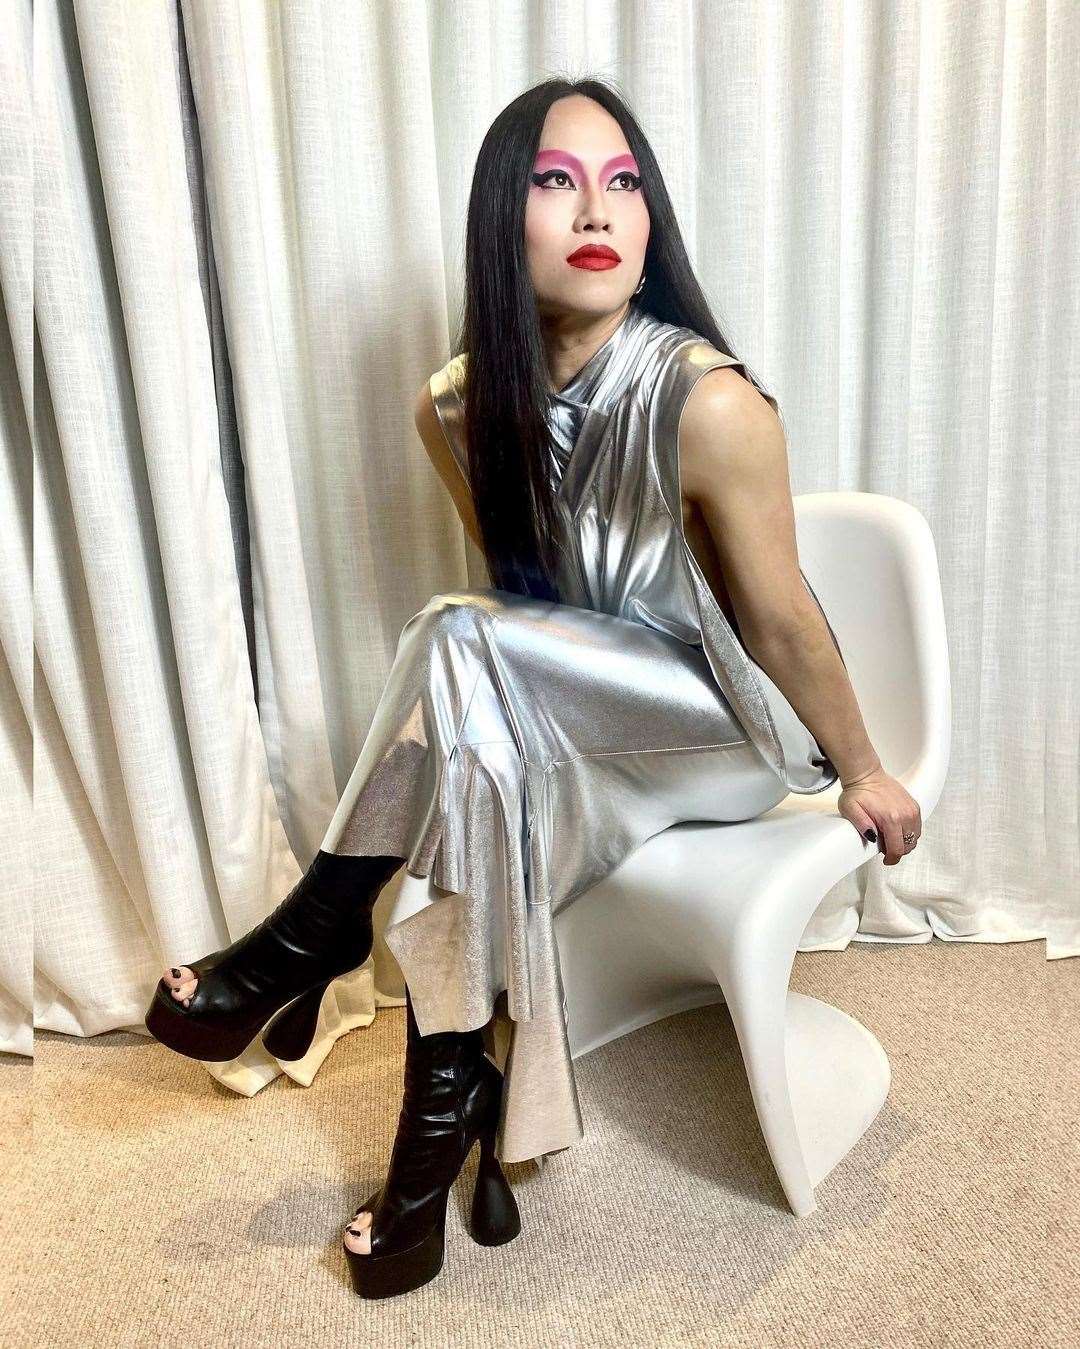 Le Fil, who is both a drag performer and a pop artist, will take the stage at Canterbury Pride 2023. Picture: iamlefil/Instagram